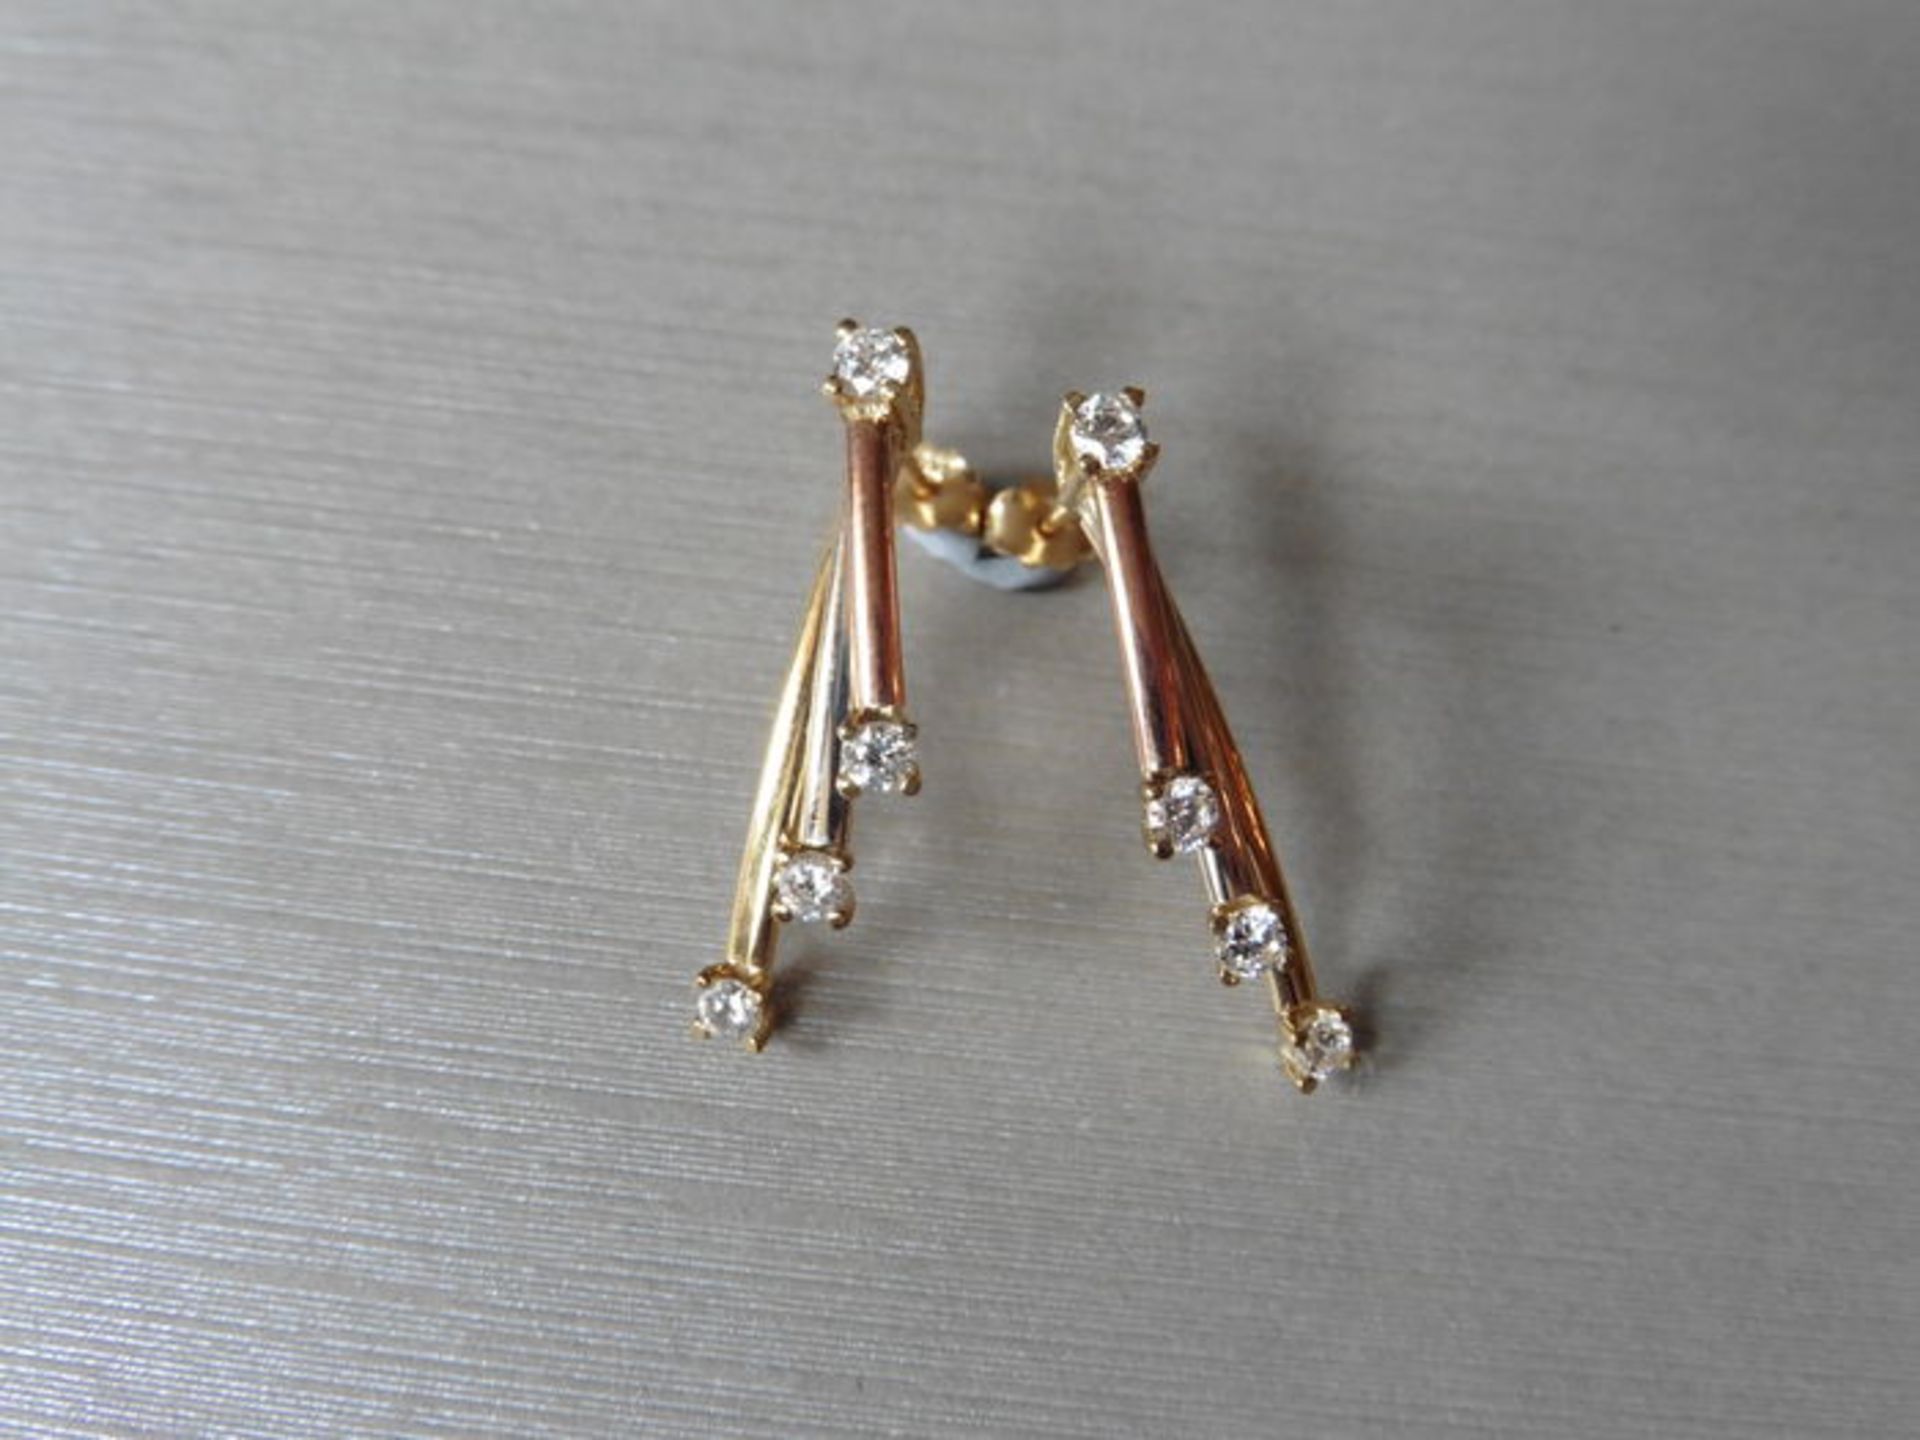 9ct gold diamond set drop style earrings. Set with white, rose and yellow gold bars with a small - Image 3 of 5